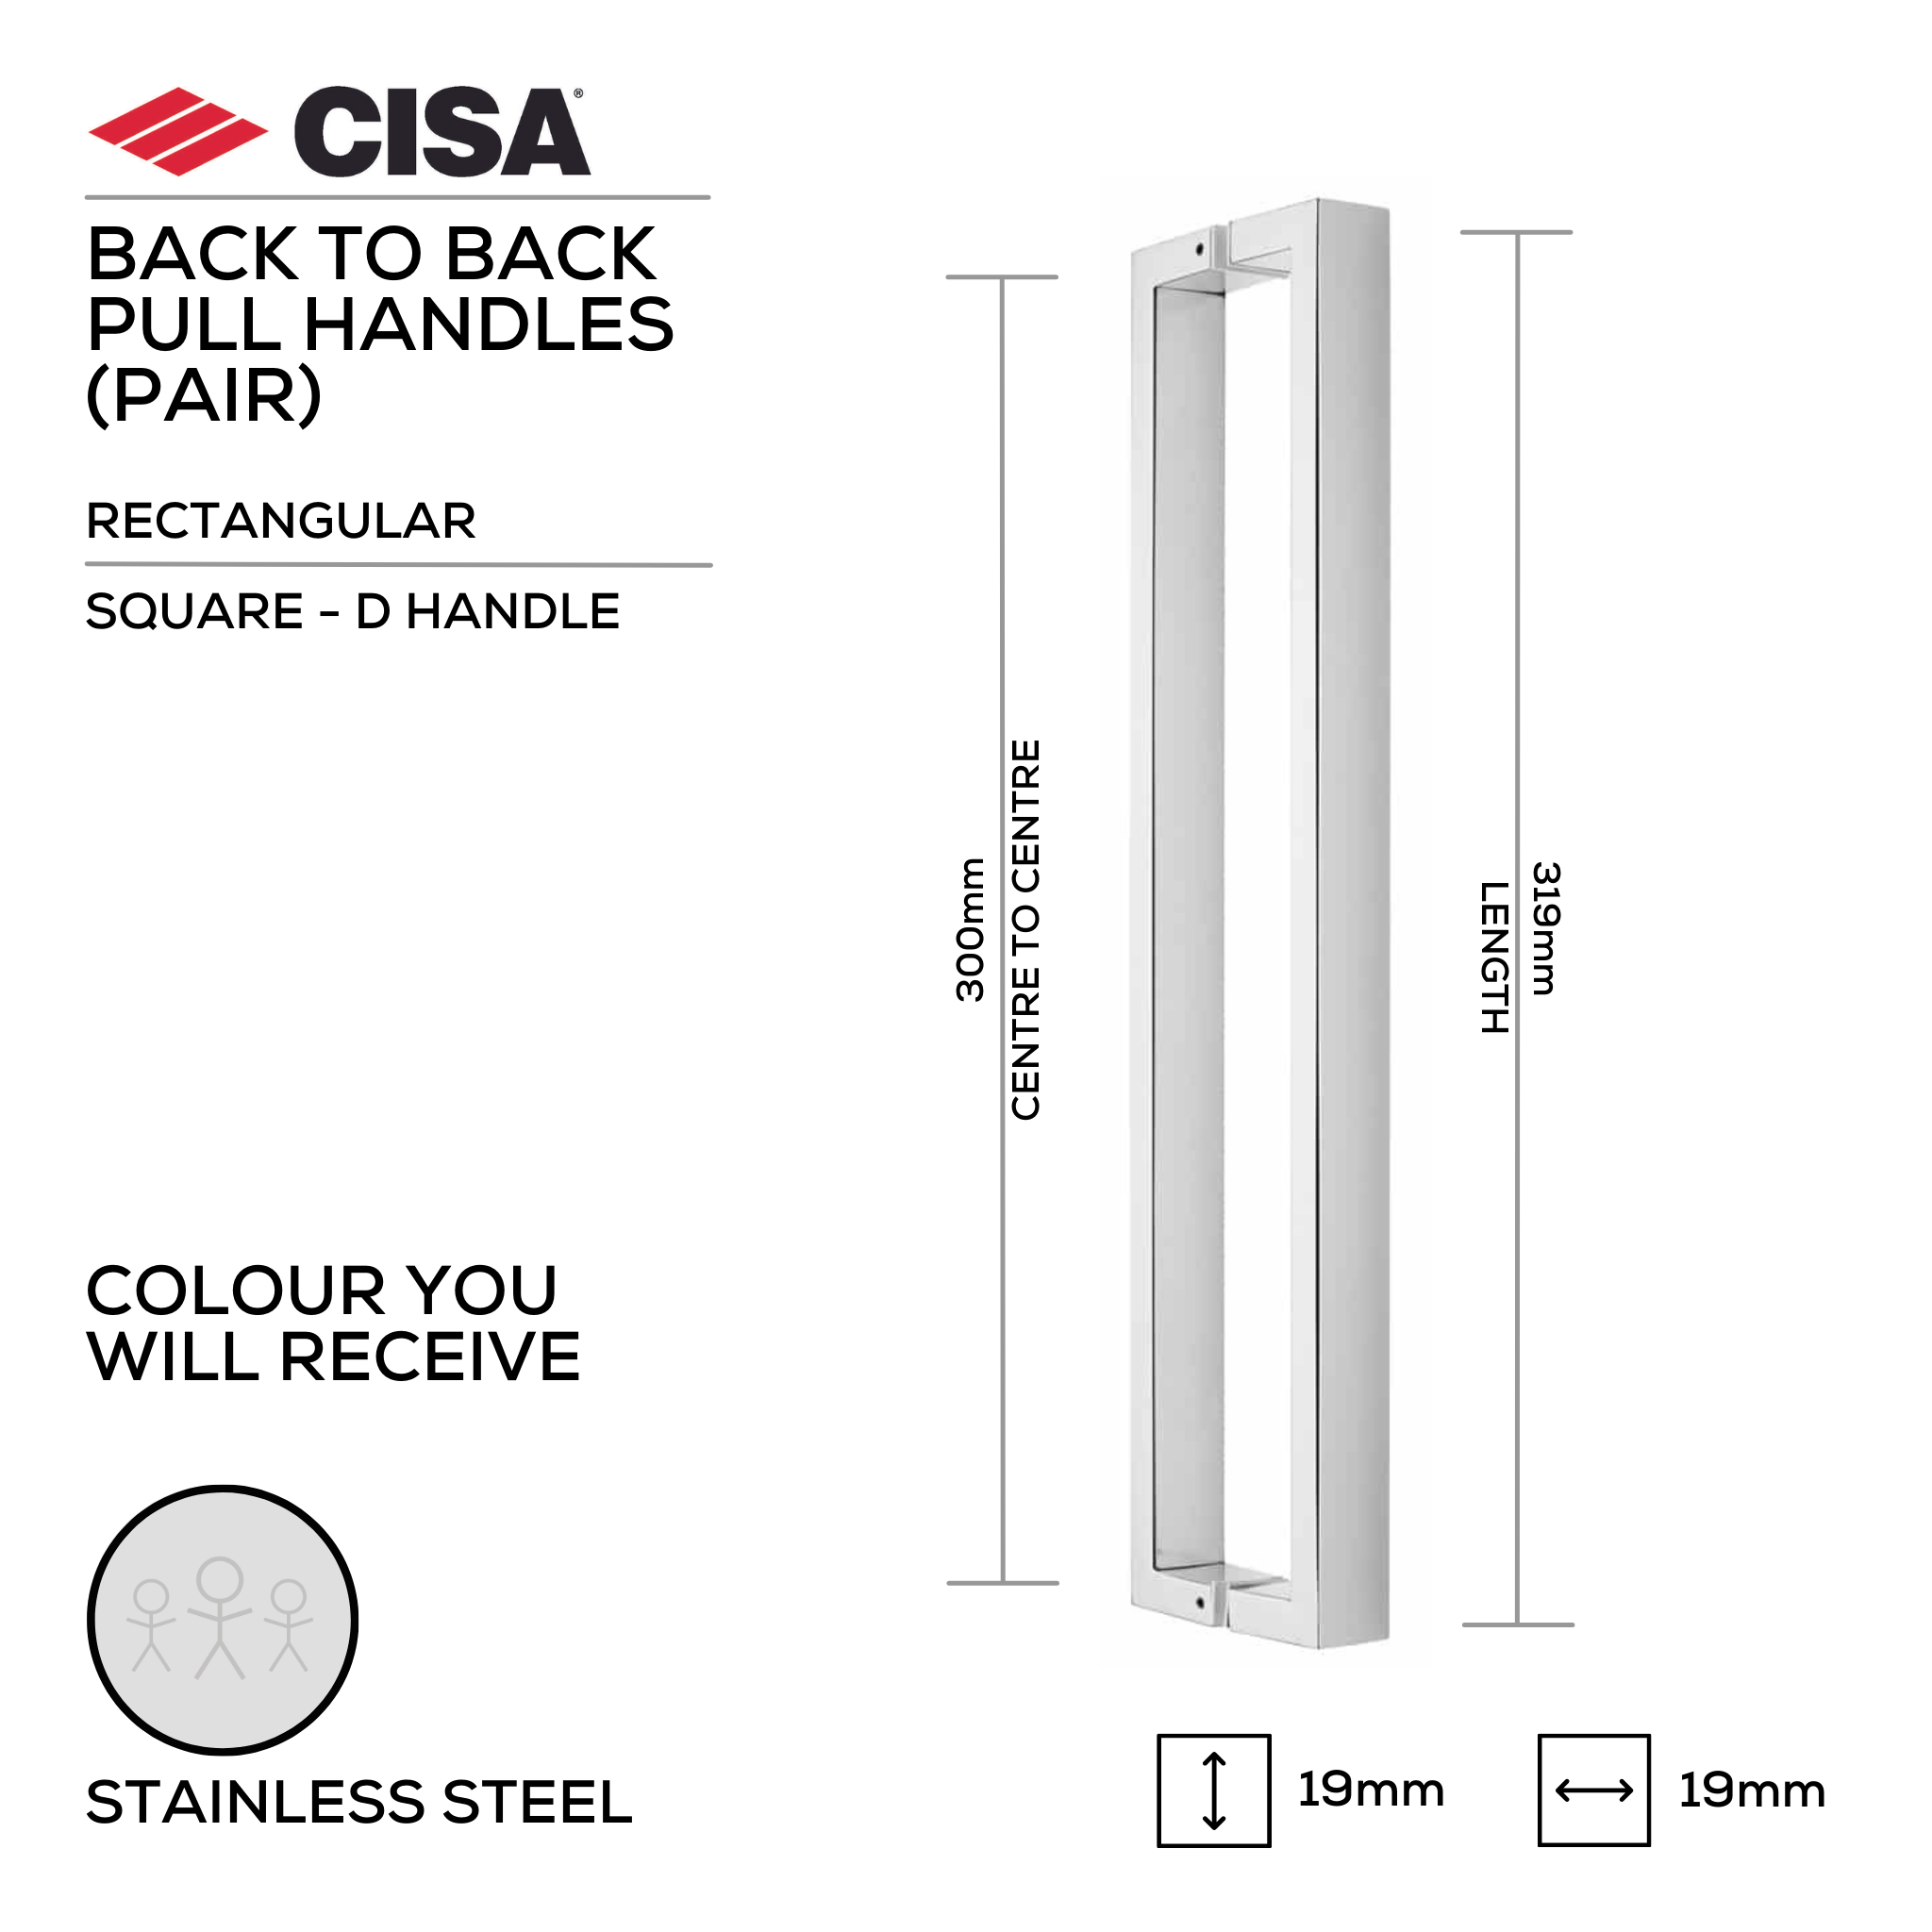 FP.SD02.BB.SS, Pull Handle, Square, D Handle, BTB, 19mm (Ø) x 319mm (l) x 300mm (ctc), Stainless Steel, CISA